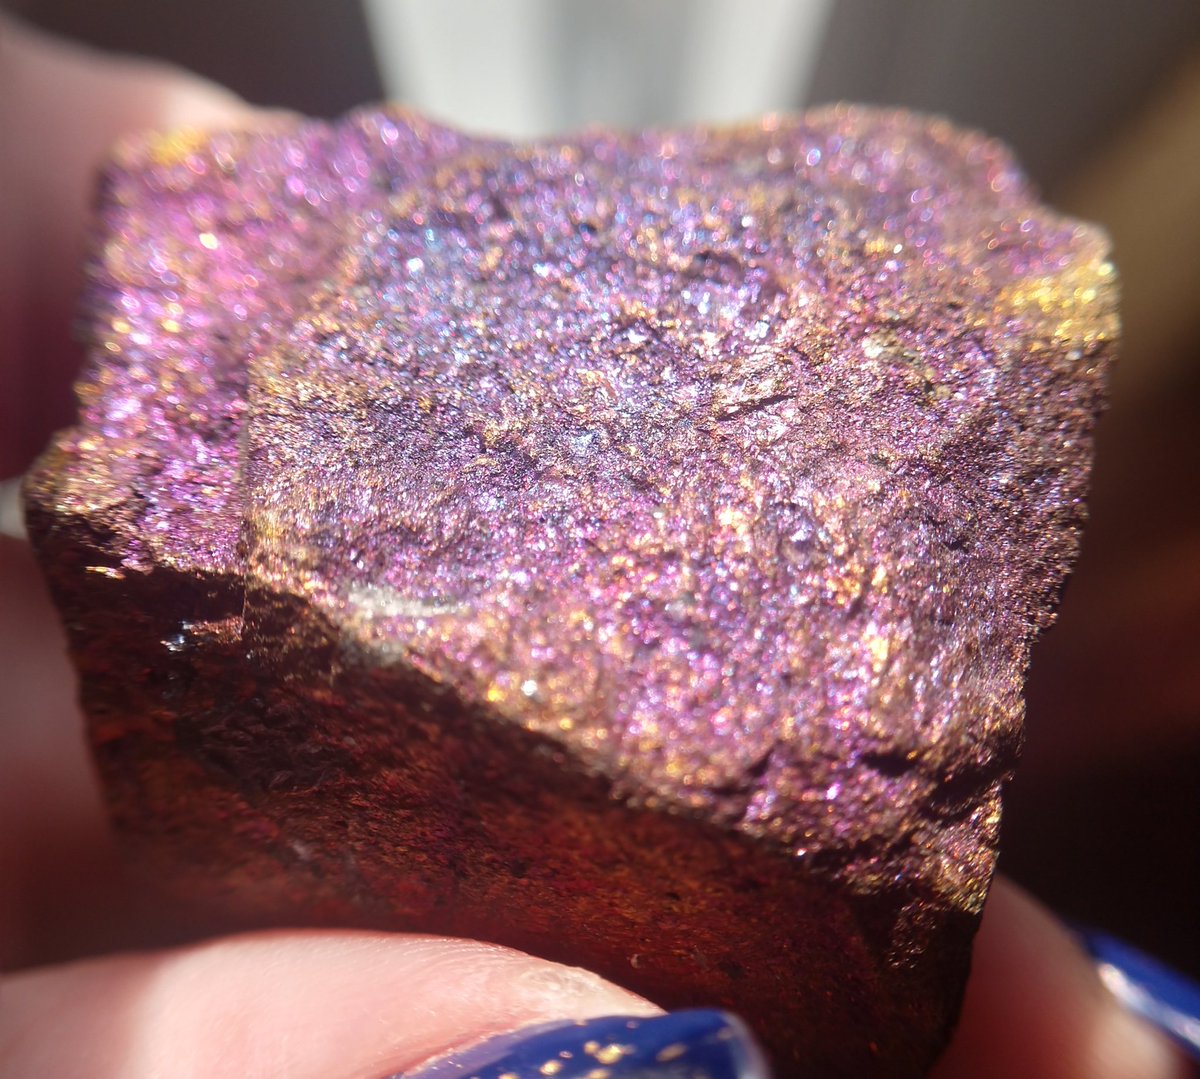 Day 5  #Rocktober  #PurpleNGL, I like rocks cause they're pretty. Like this piece of Chalcopyrite!  It's a copper iron sulfide mineral, which is typically brass yellow. This one has a purple tarnish to it, and it glitters! Thanks to  @FossilLocator for the identification. 